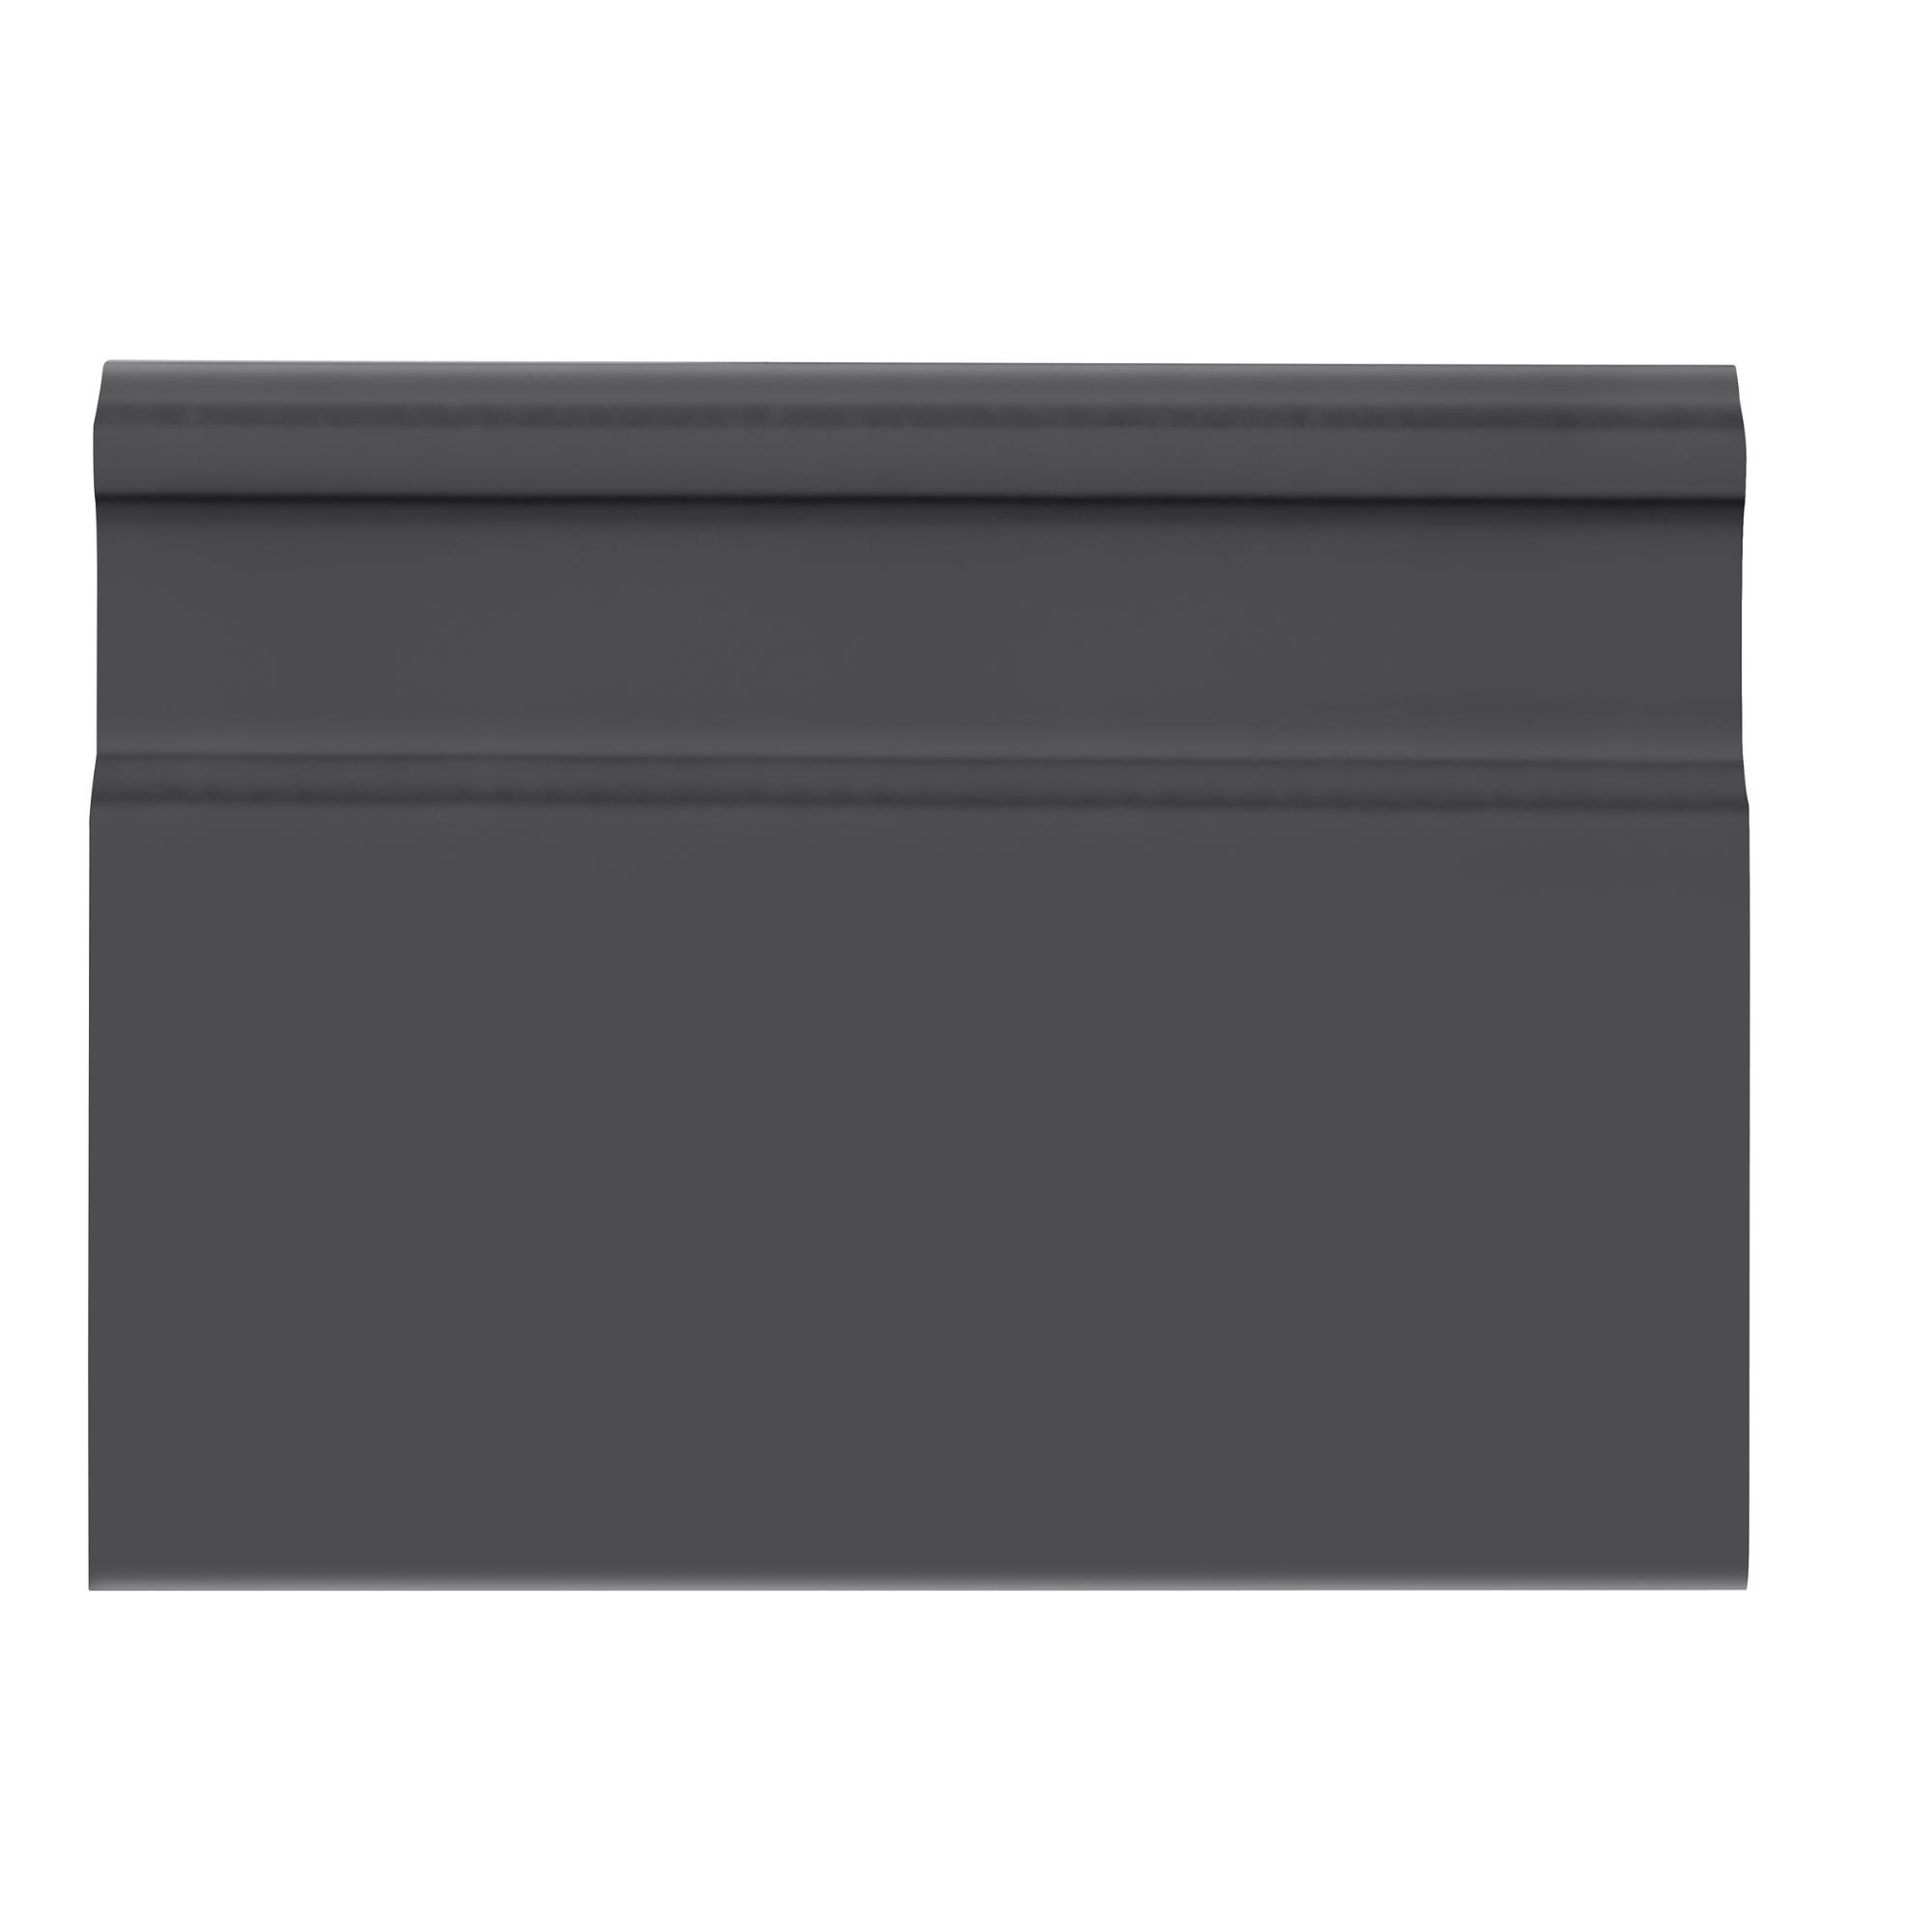 Imperial Pewter Gls Skirting